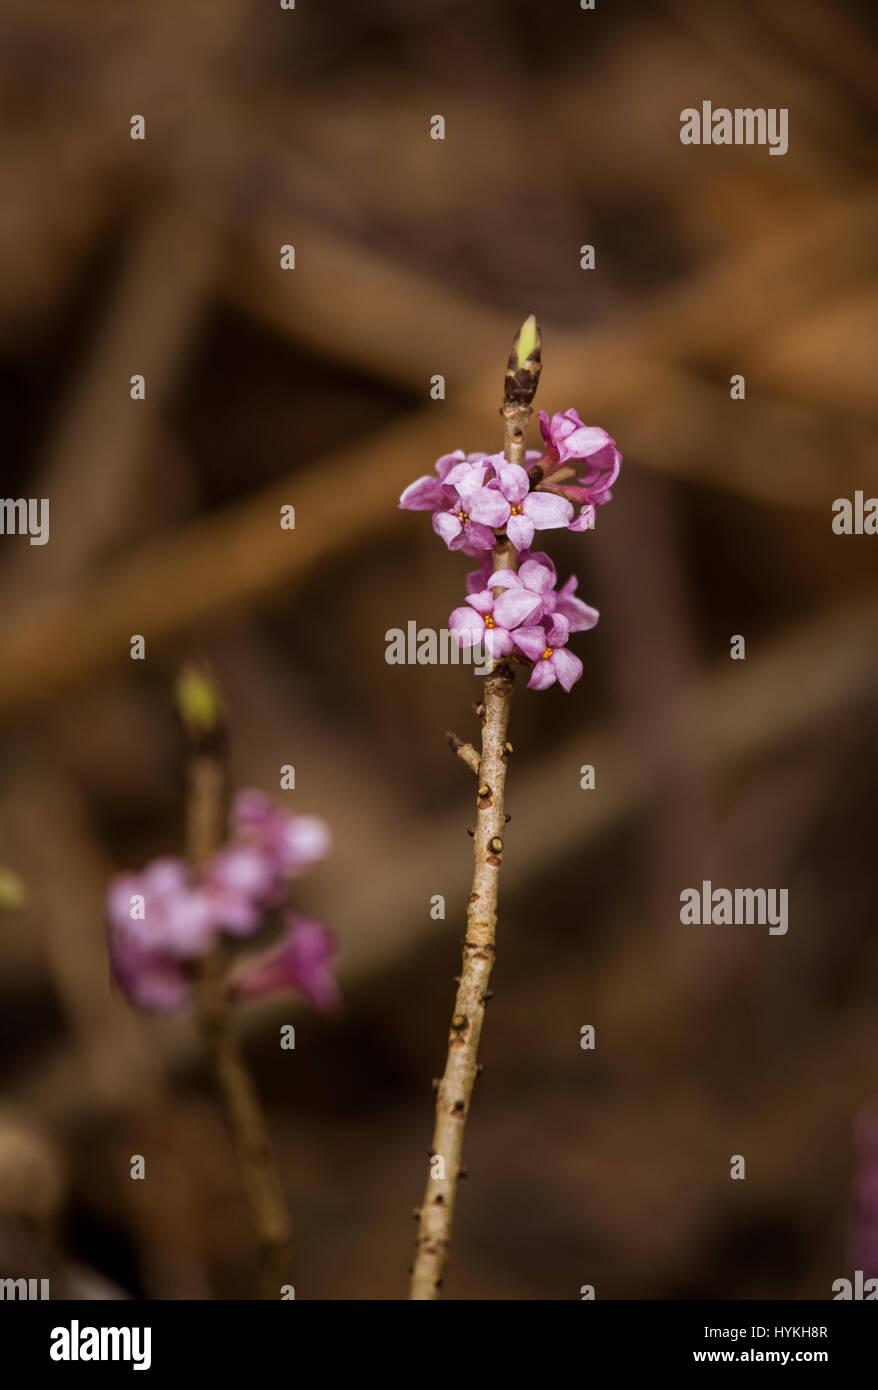 Beautiful pink daphne mezereum blossoms in a natural habitat in early spring. Stock Photo